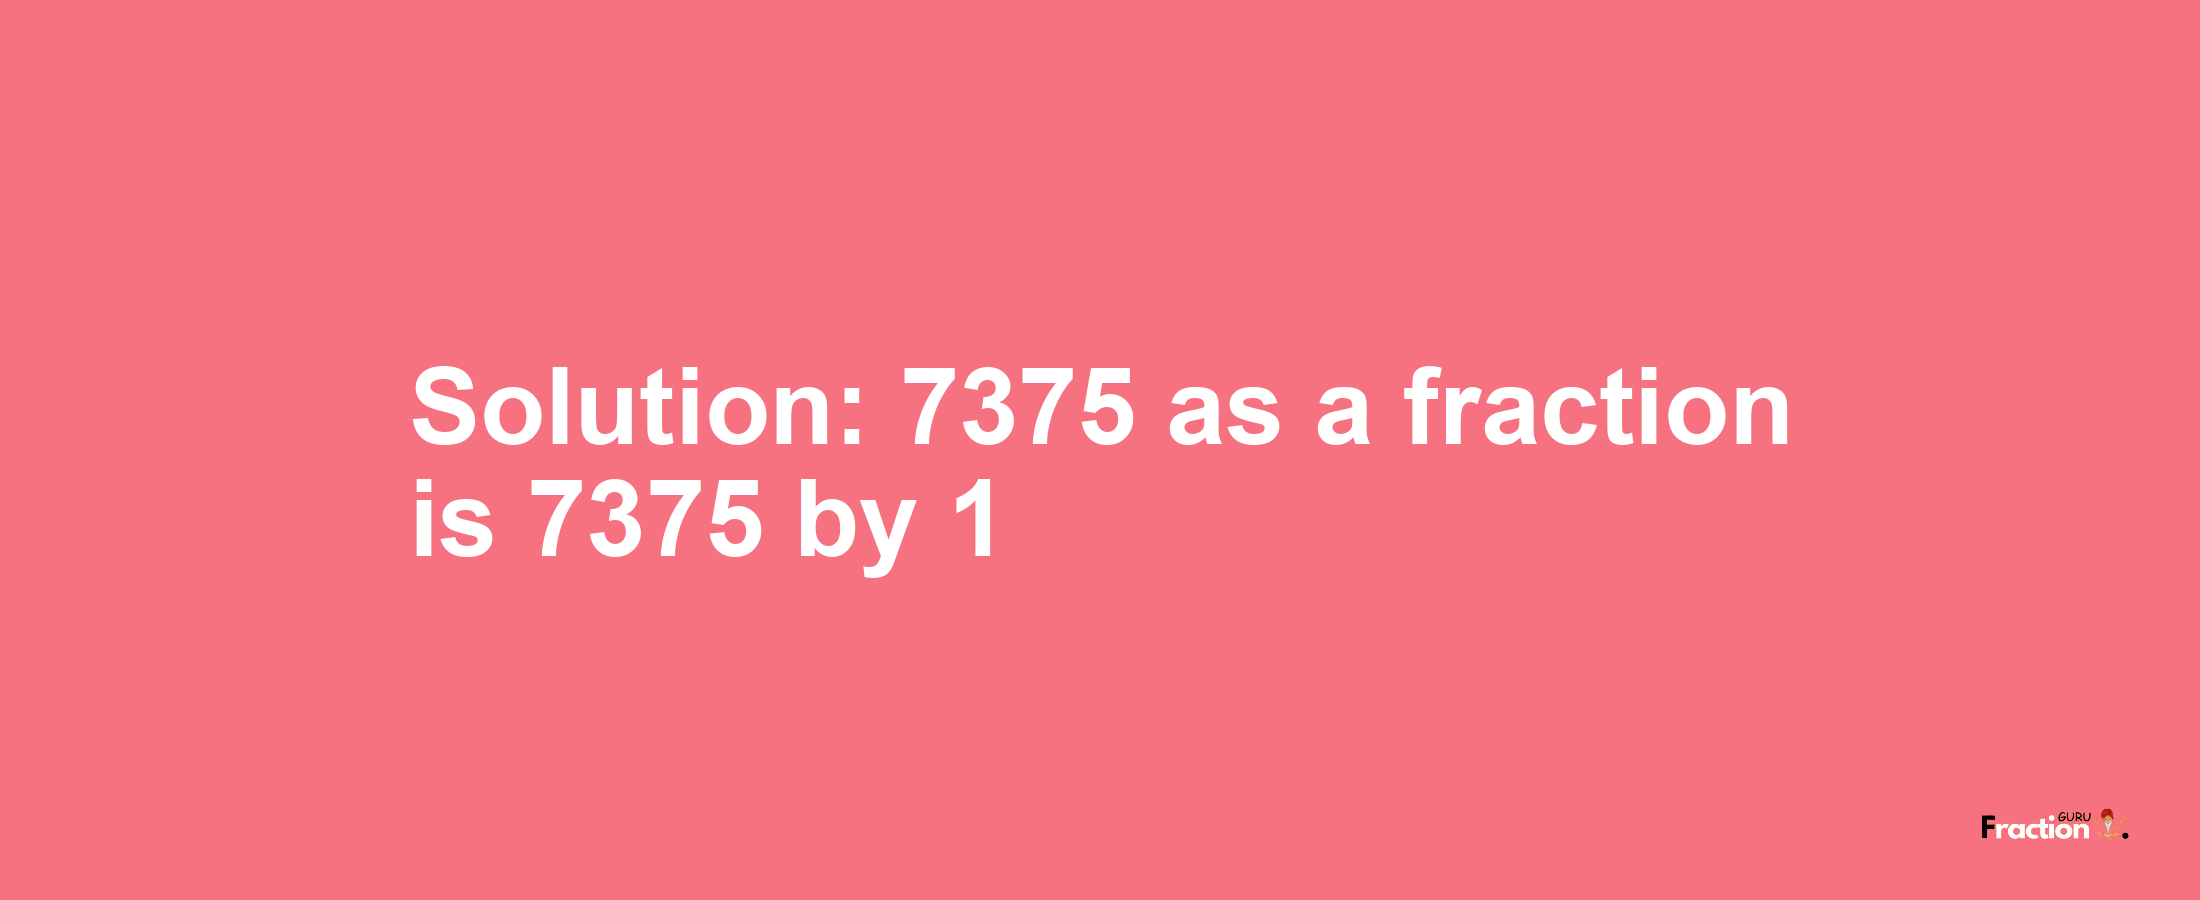 Solution:7375 as a fraction is 7375/1